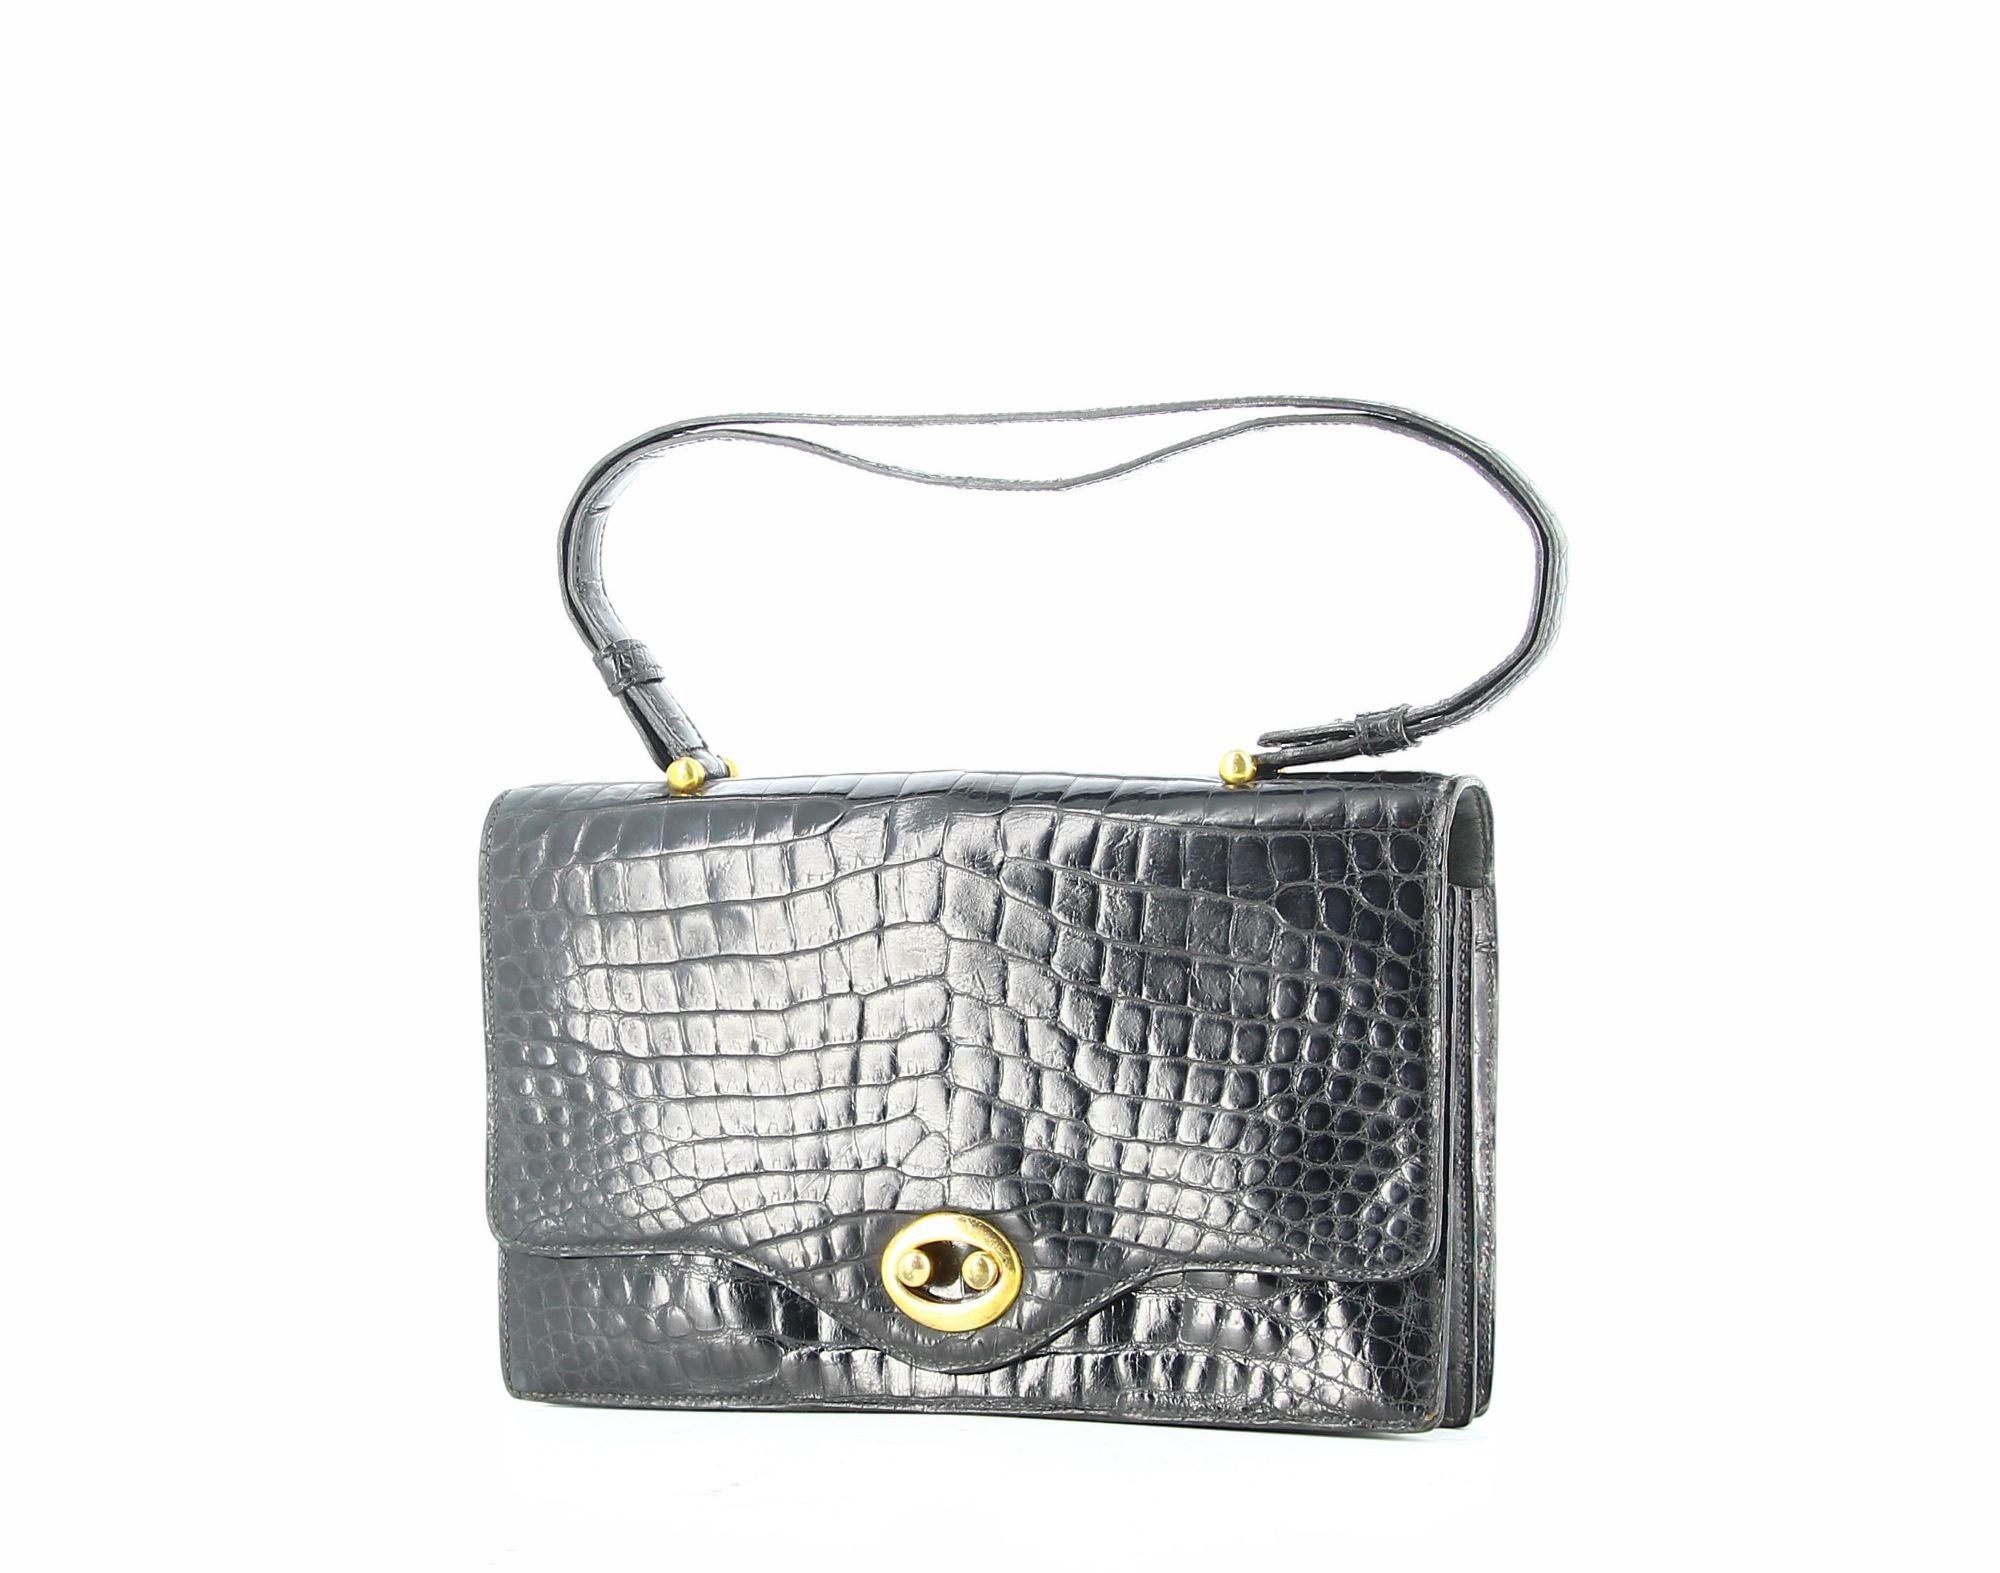 Hermès 1970's black crocodile bag
Very good condition, shows slight traces of wear with time.
Handbag to wear in everyday life but also during a dinner, a colour that goes with everything, the buckle is golden, a handle that is adjustable to wear it